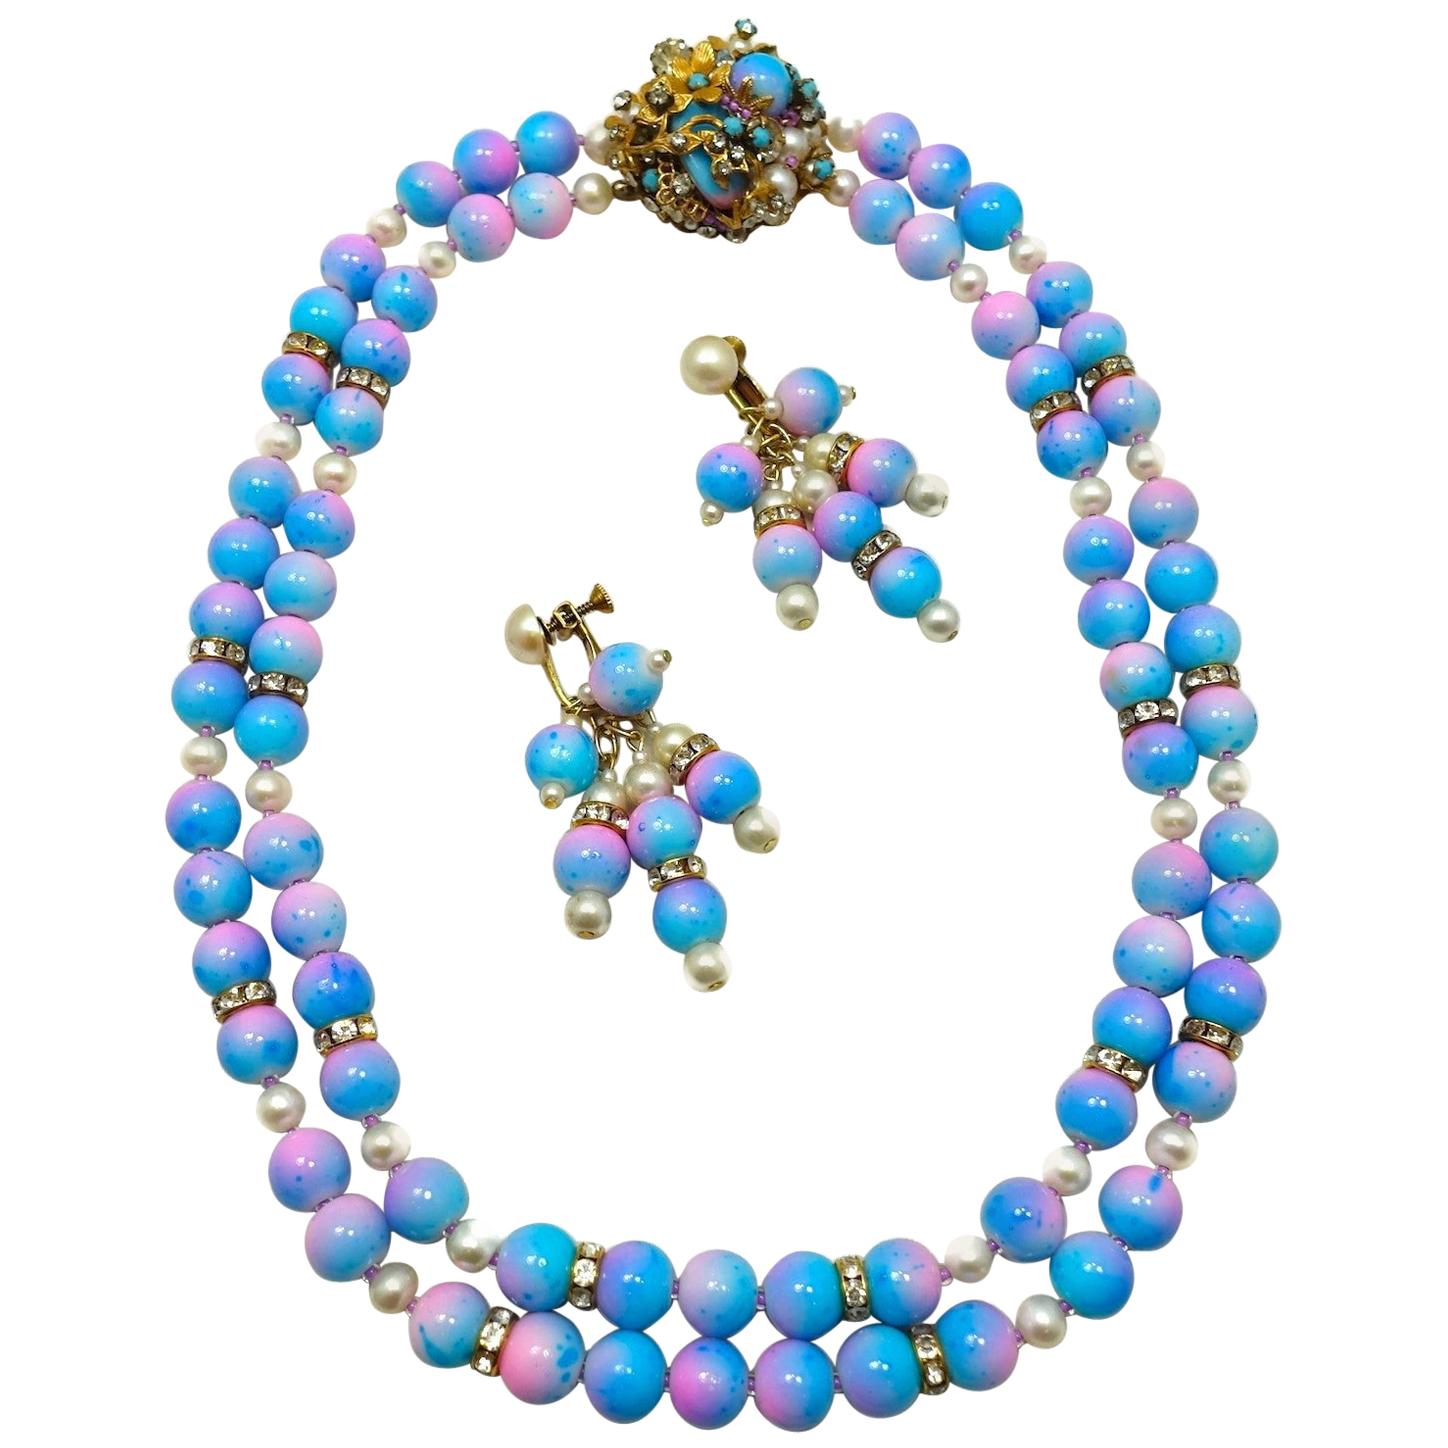 Early Vintage Miriam Haskell Rare Pink & Blue Glass Bead and Faux Pearl 2-Strand For Sale